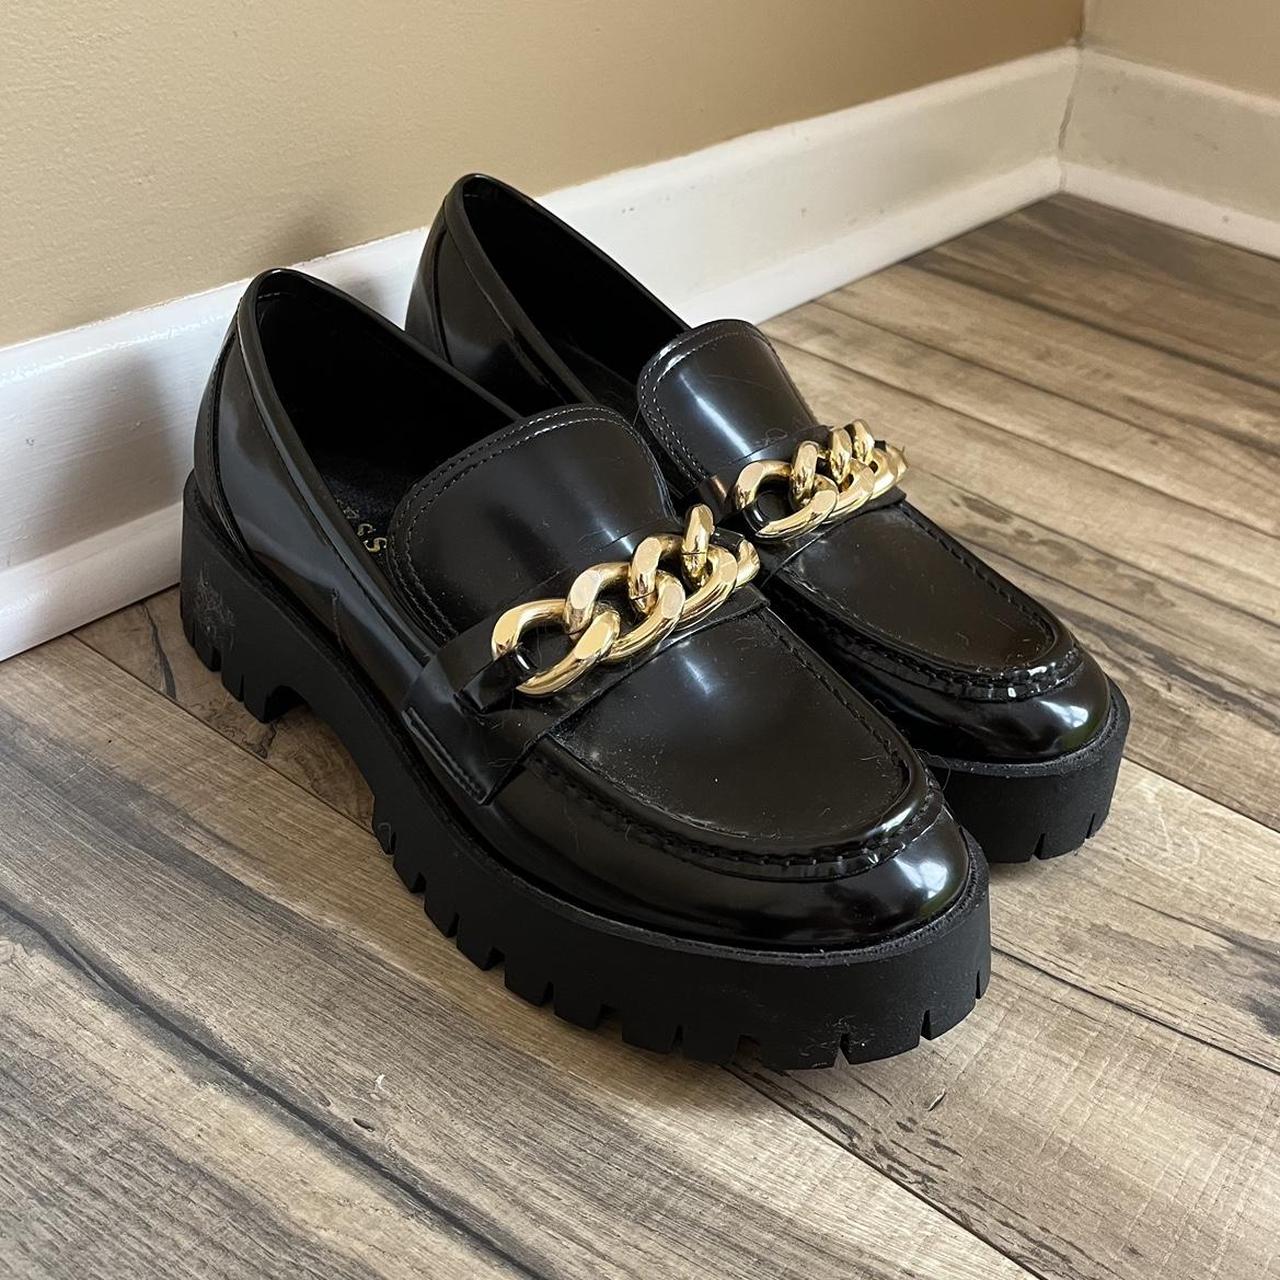 Guess Women's Black and Gold Loafers | Depop